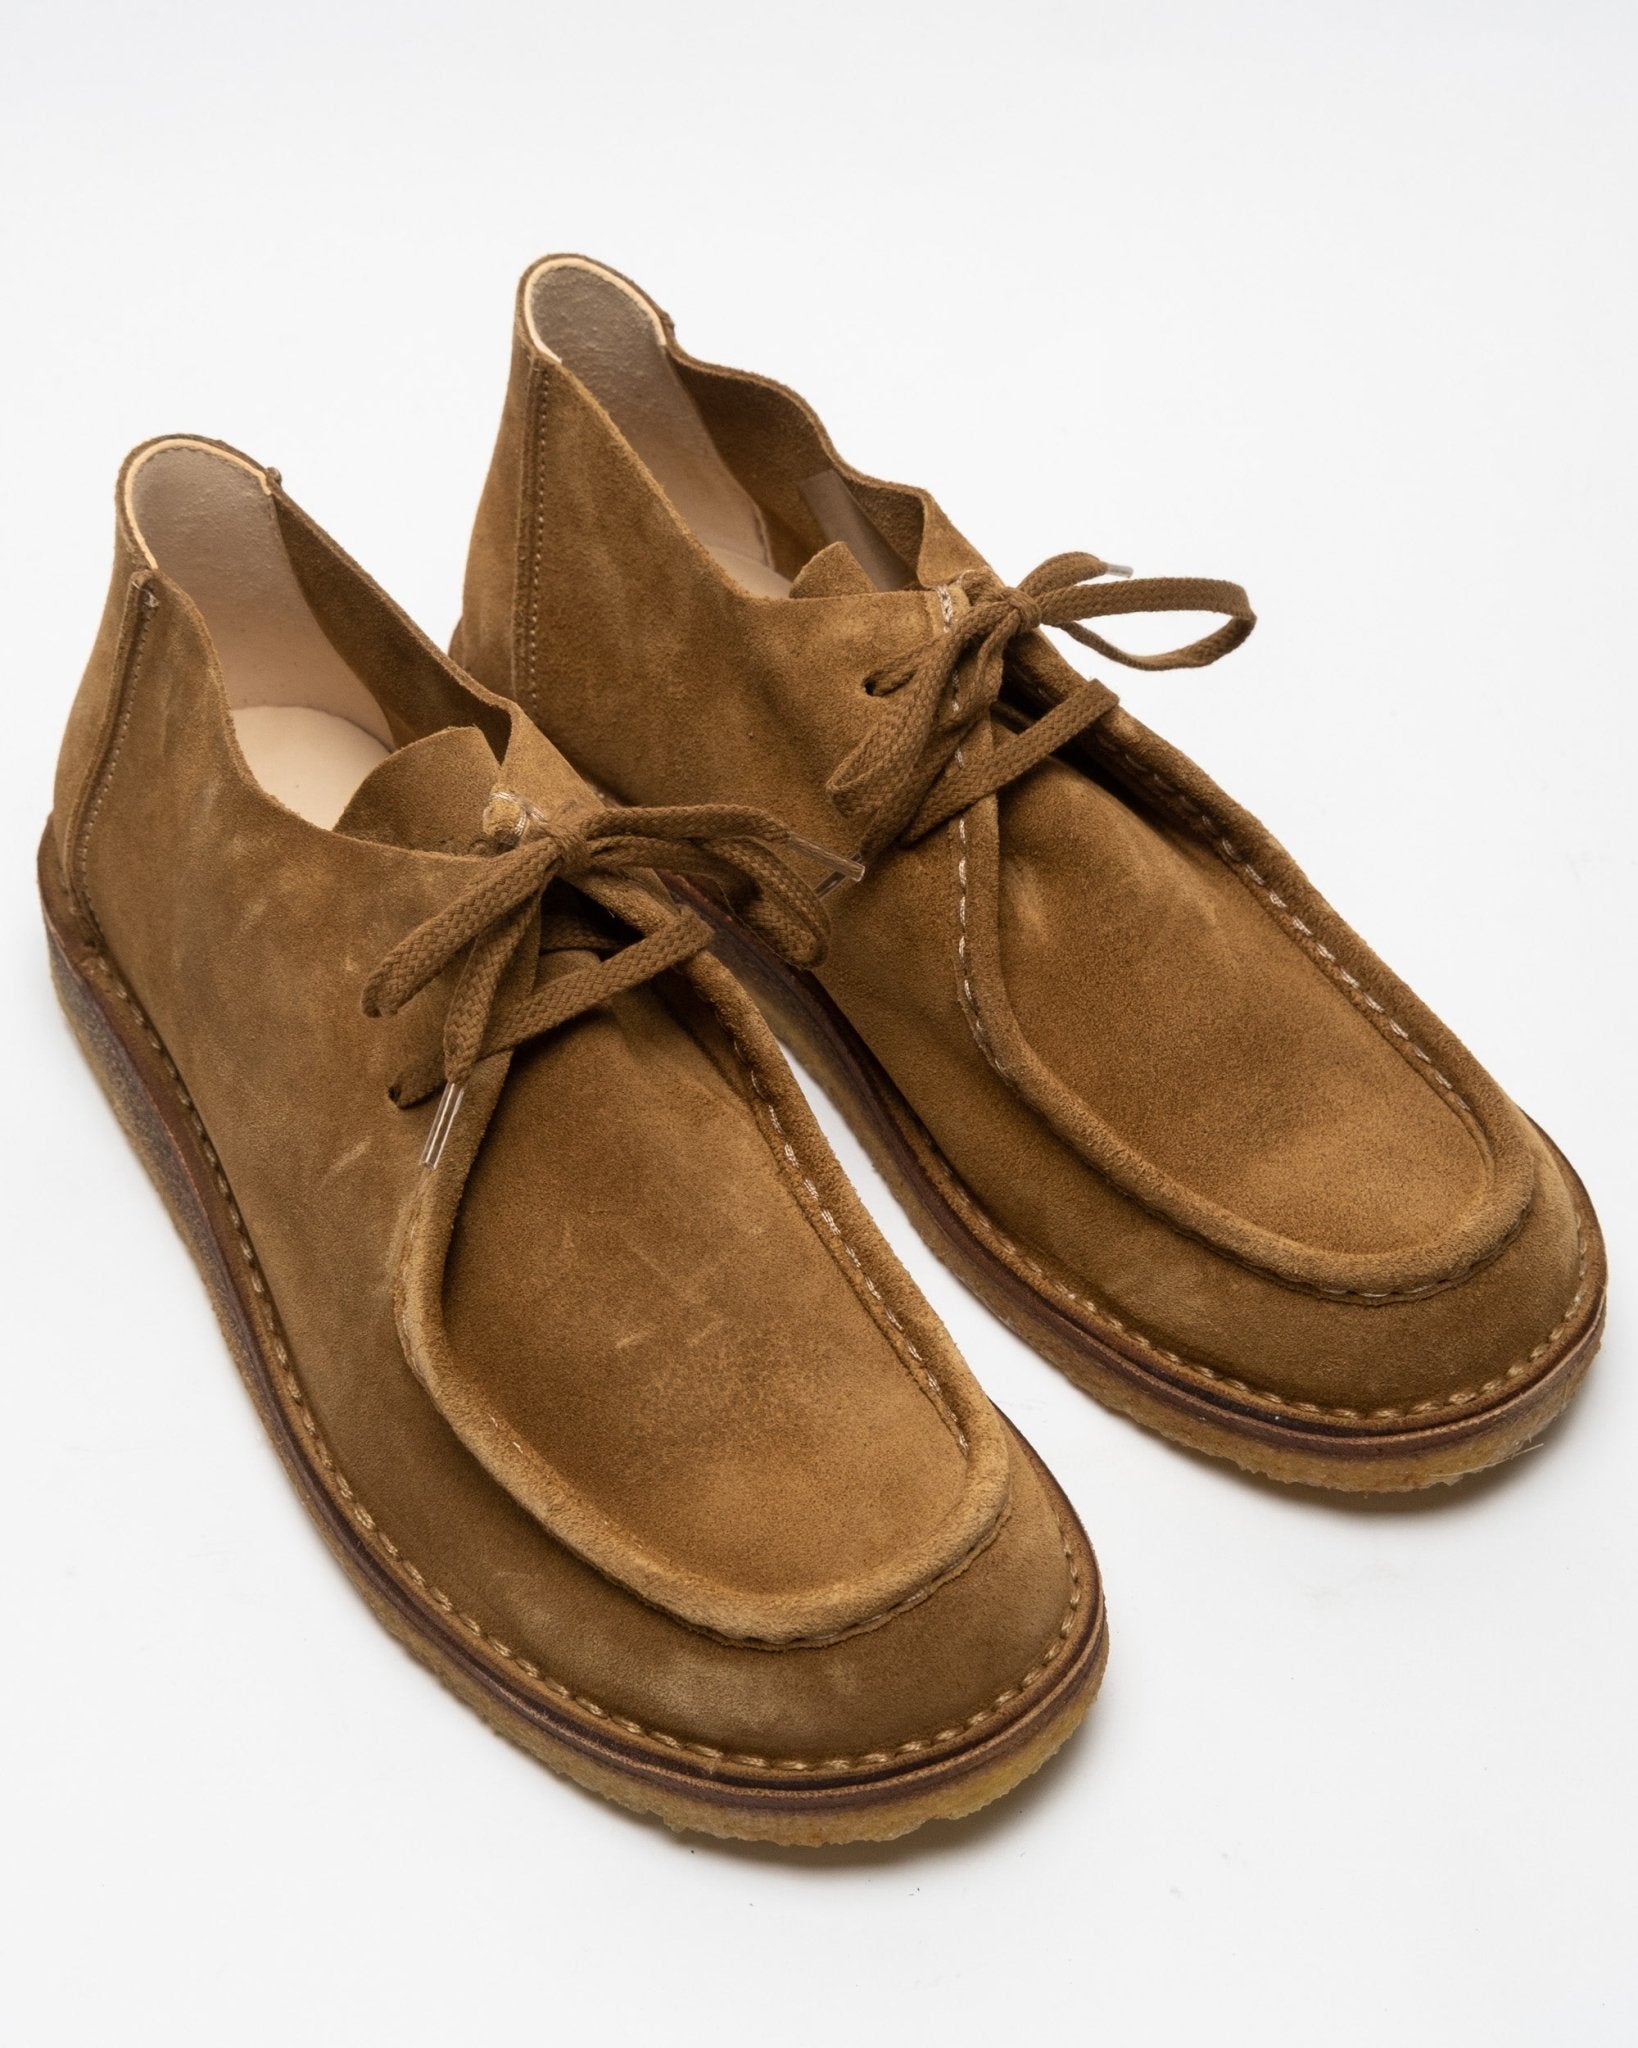 Beenflex Shoes Whiskey - Meadow